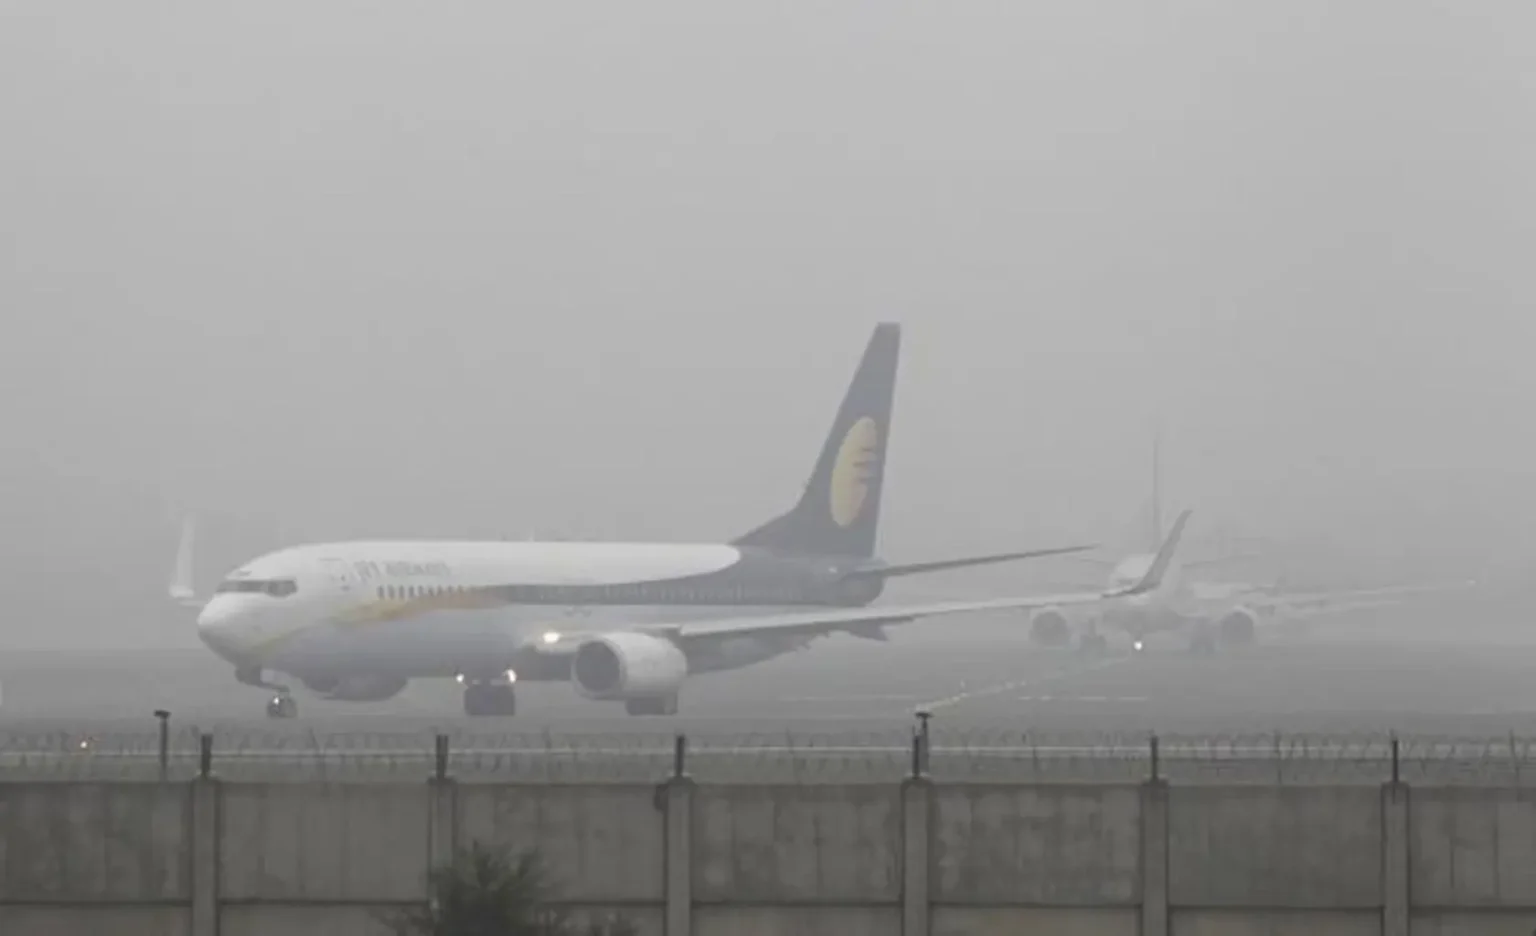 aeroplane in delhi airport blurred vision due to thick fog